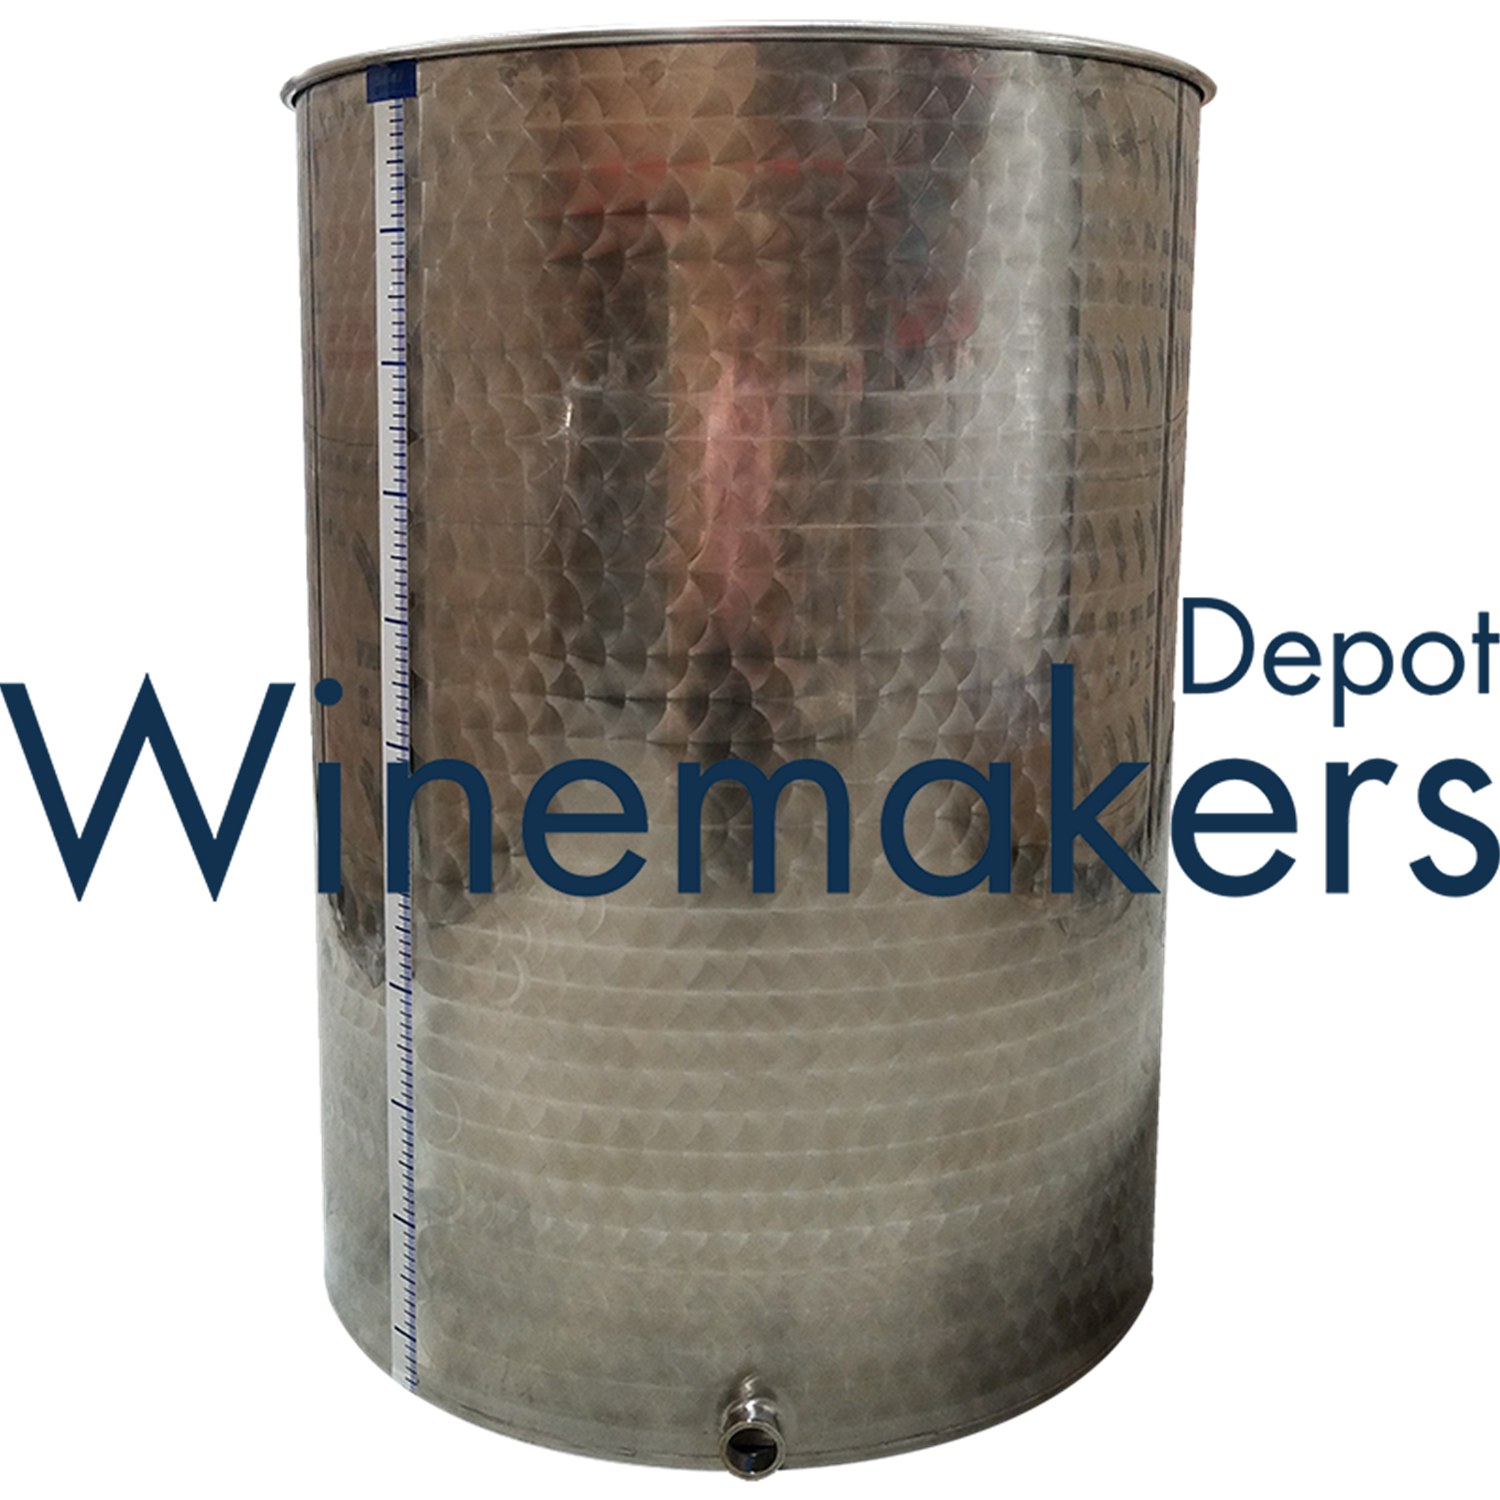 Stainless Airlock Riser for Marchisio VC Wine Tank Lid - Accepts 2 Tri  Clamp Accessories